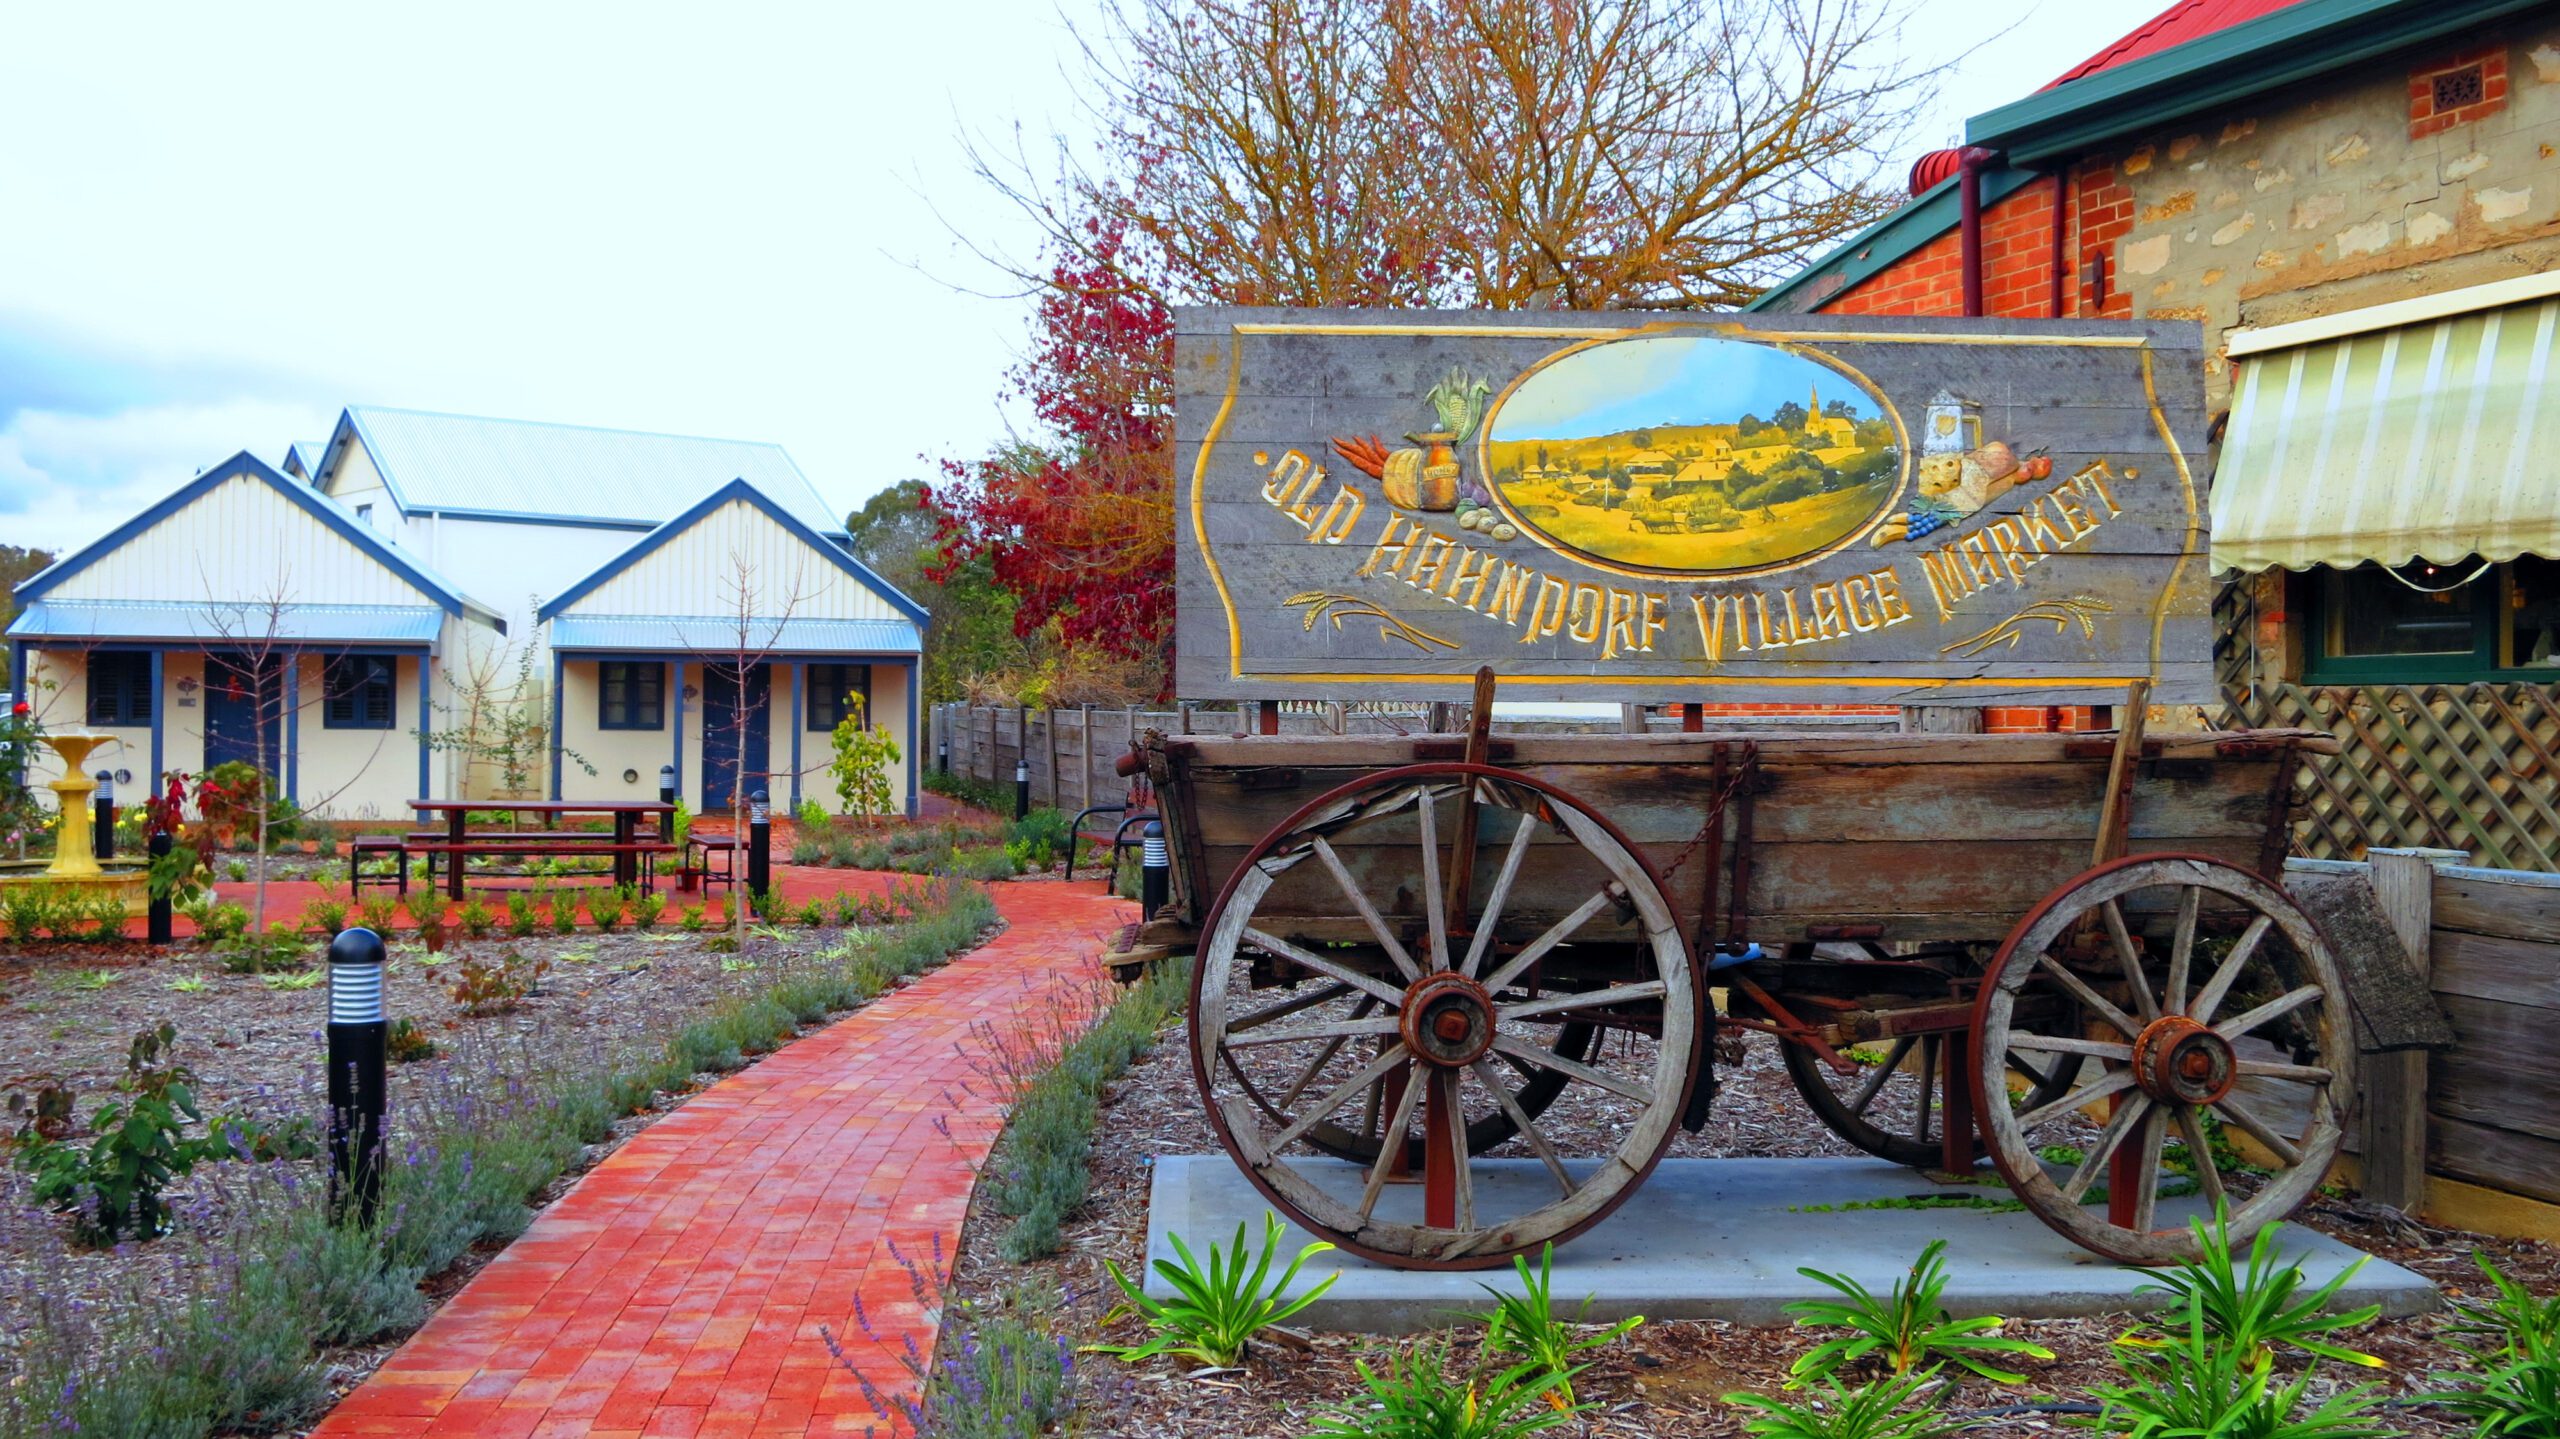 Old wagon with Old Hahndorf Village signage